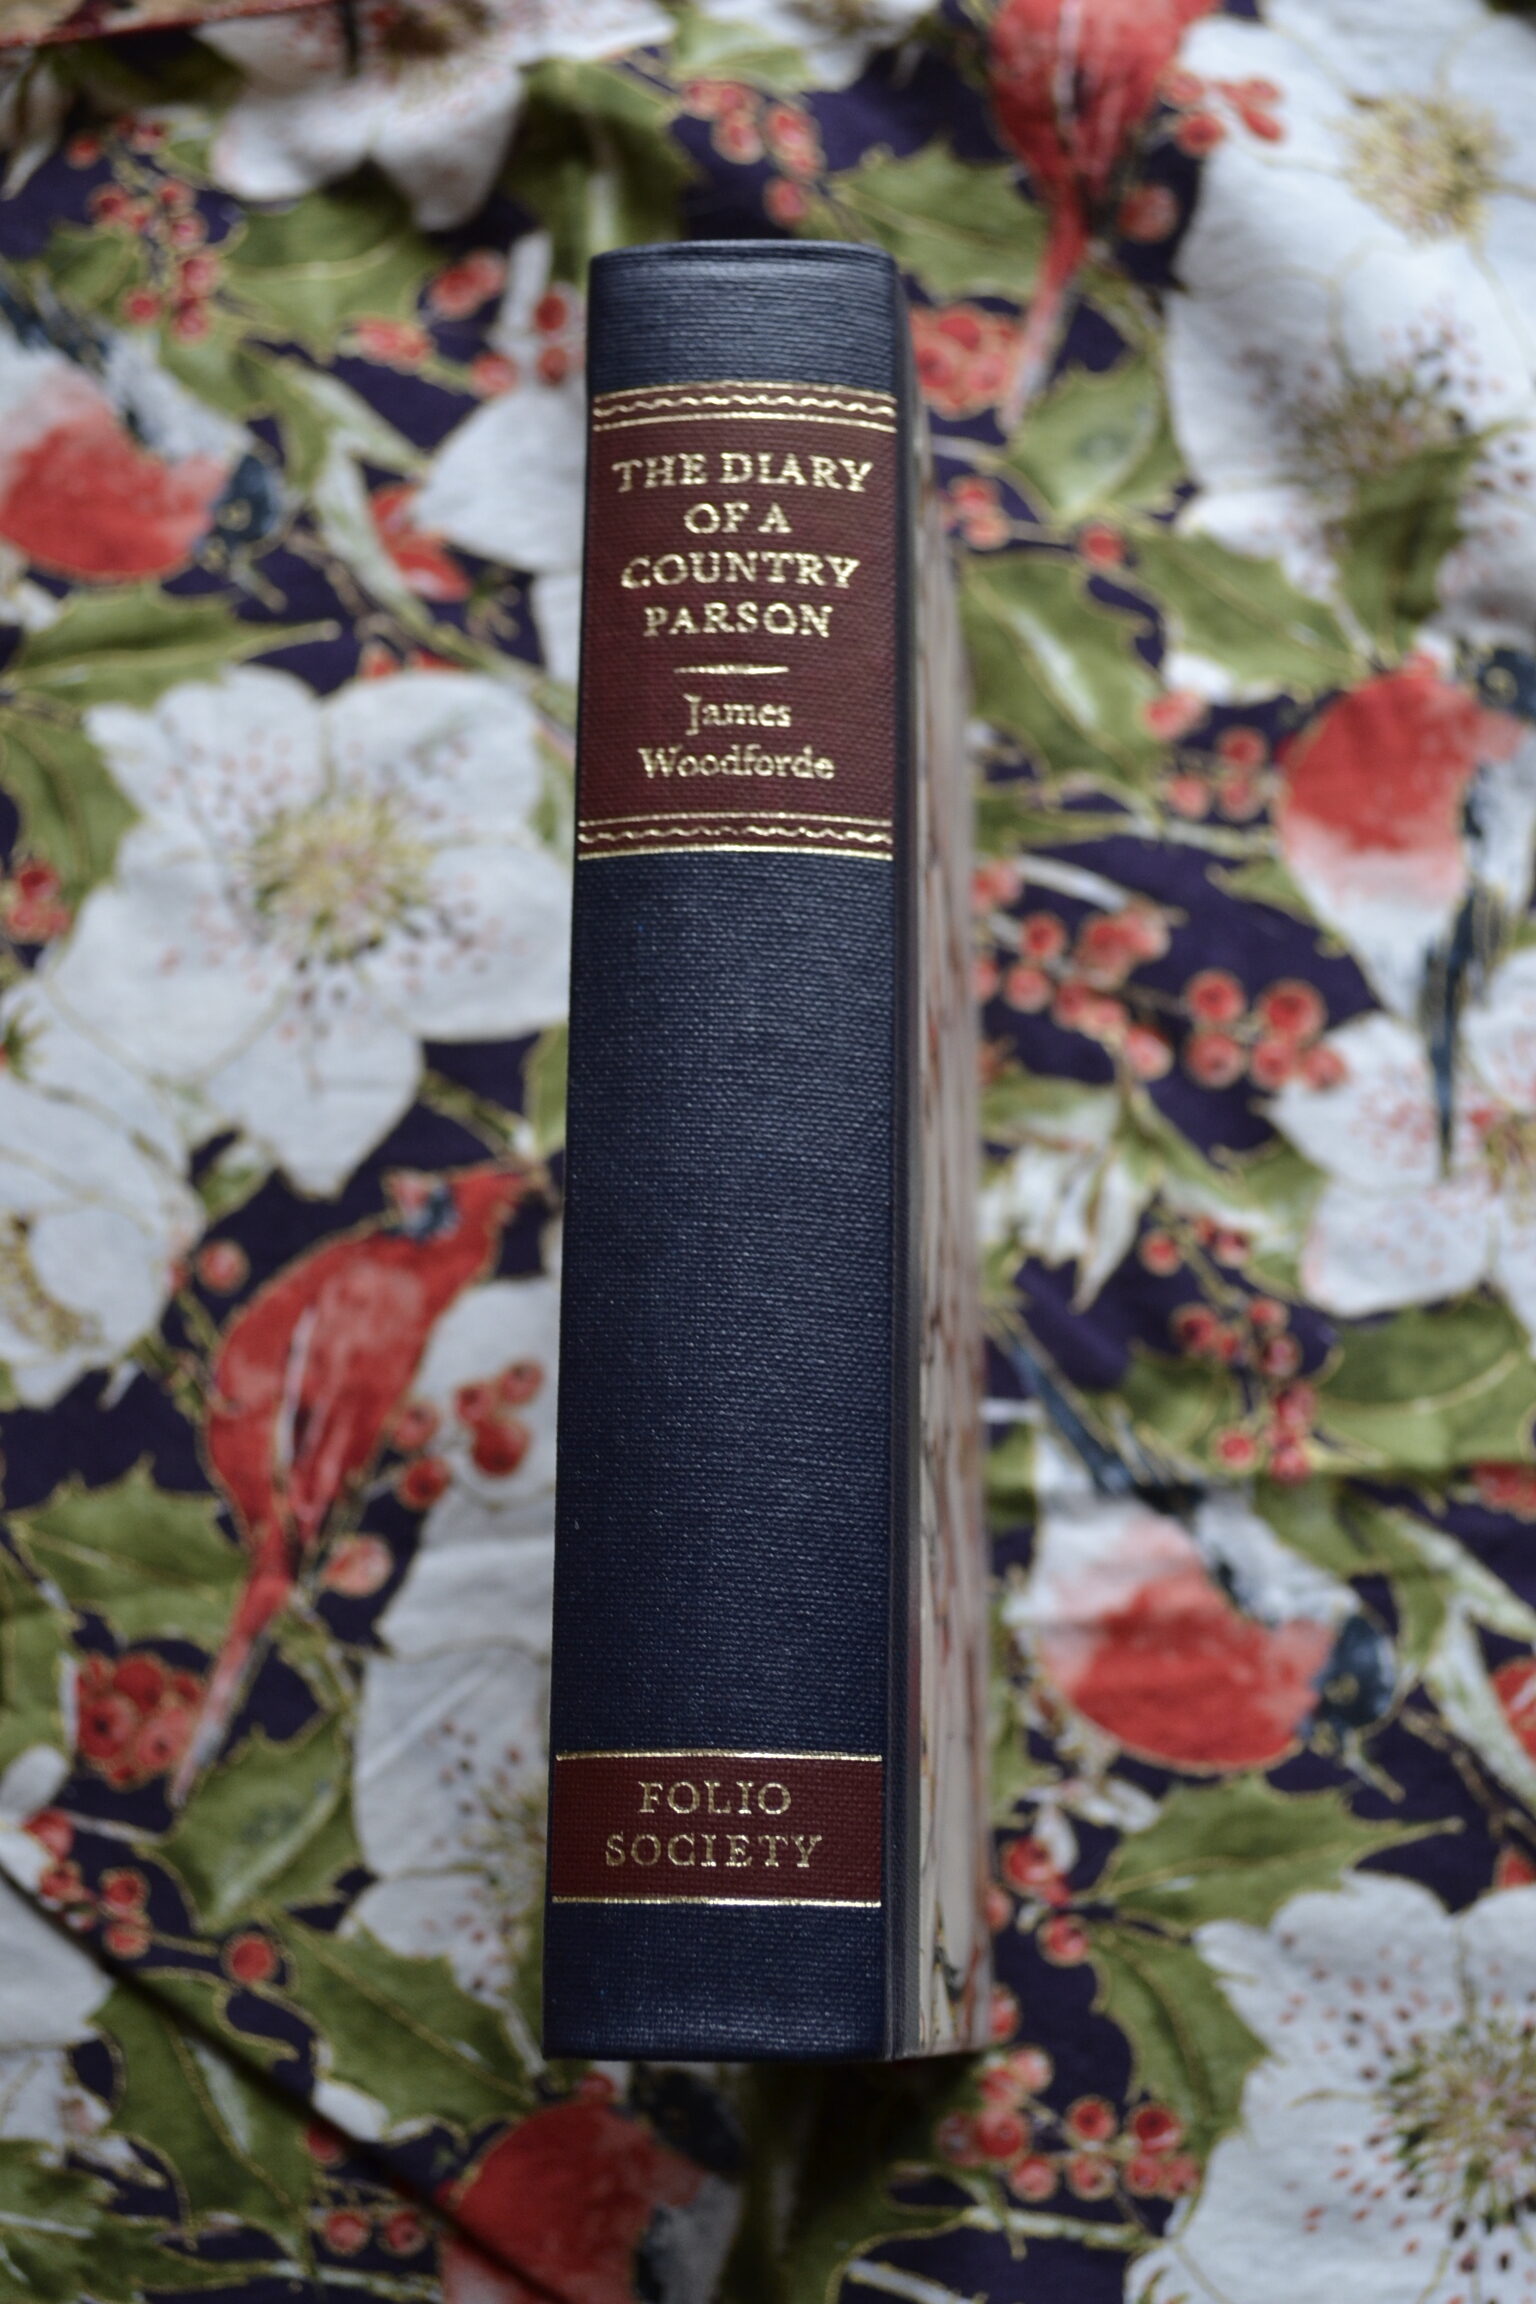 The blue spine of a book reads 'The Diary of a Country Parson' in gold letters.